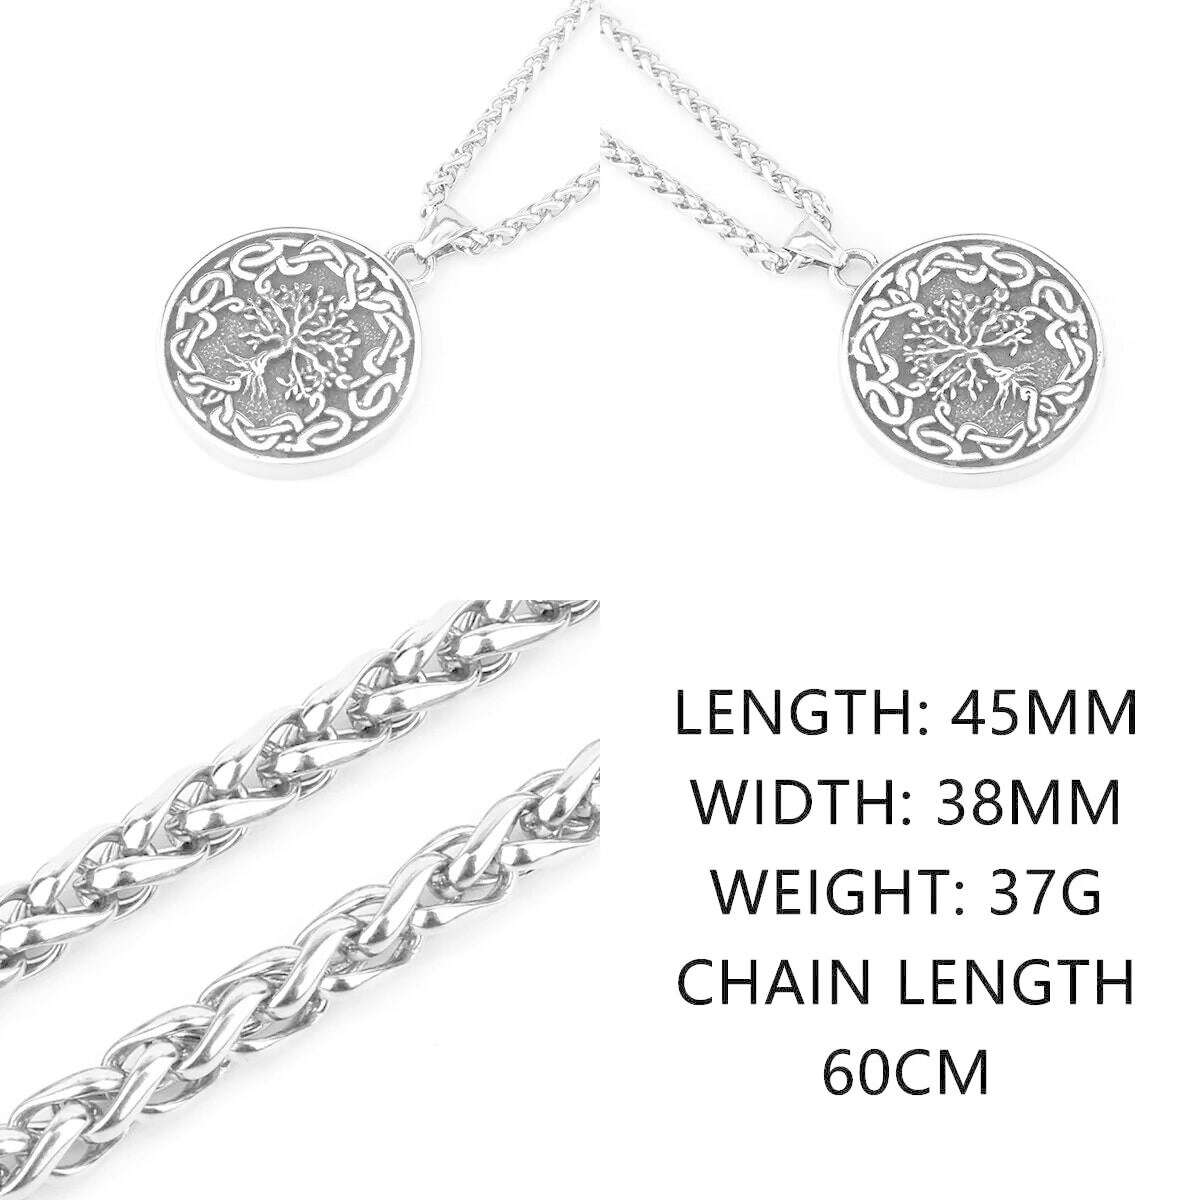 KIMLUD, Stainless Steel Viking Tree of Life Necklace Men&#39;s Fashion Vintage Hip Hop Biker Charm Pendant Necklace Amulet Jewelry Wholesale, KIMLUD Womens Clothes